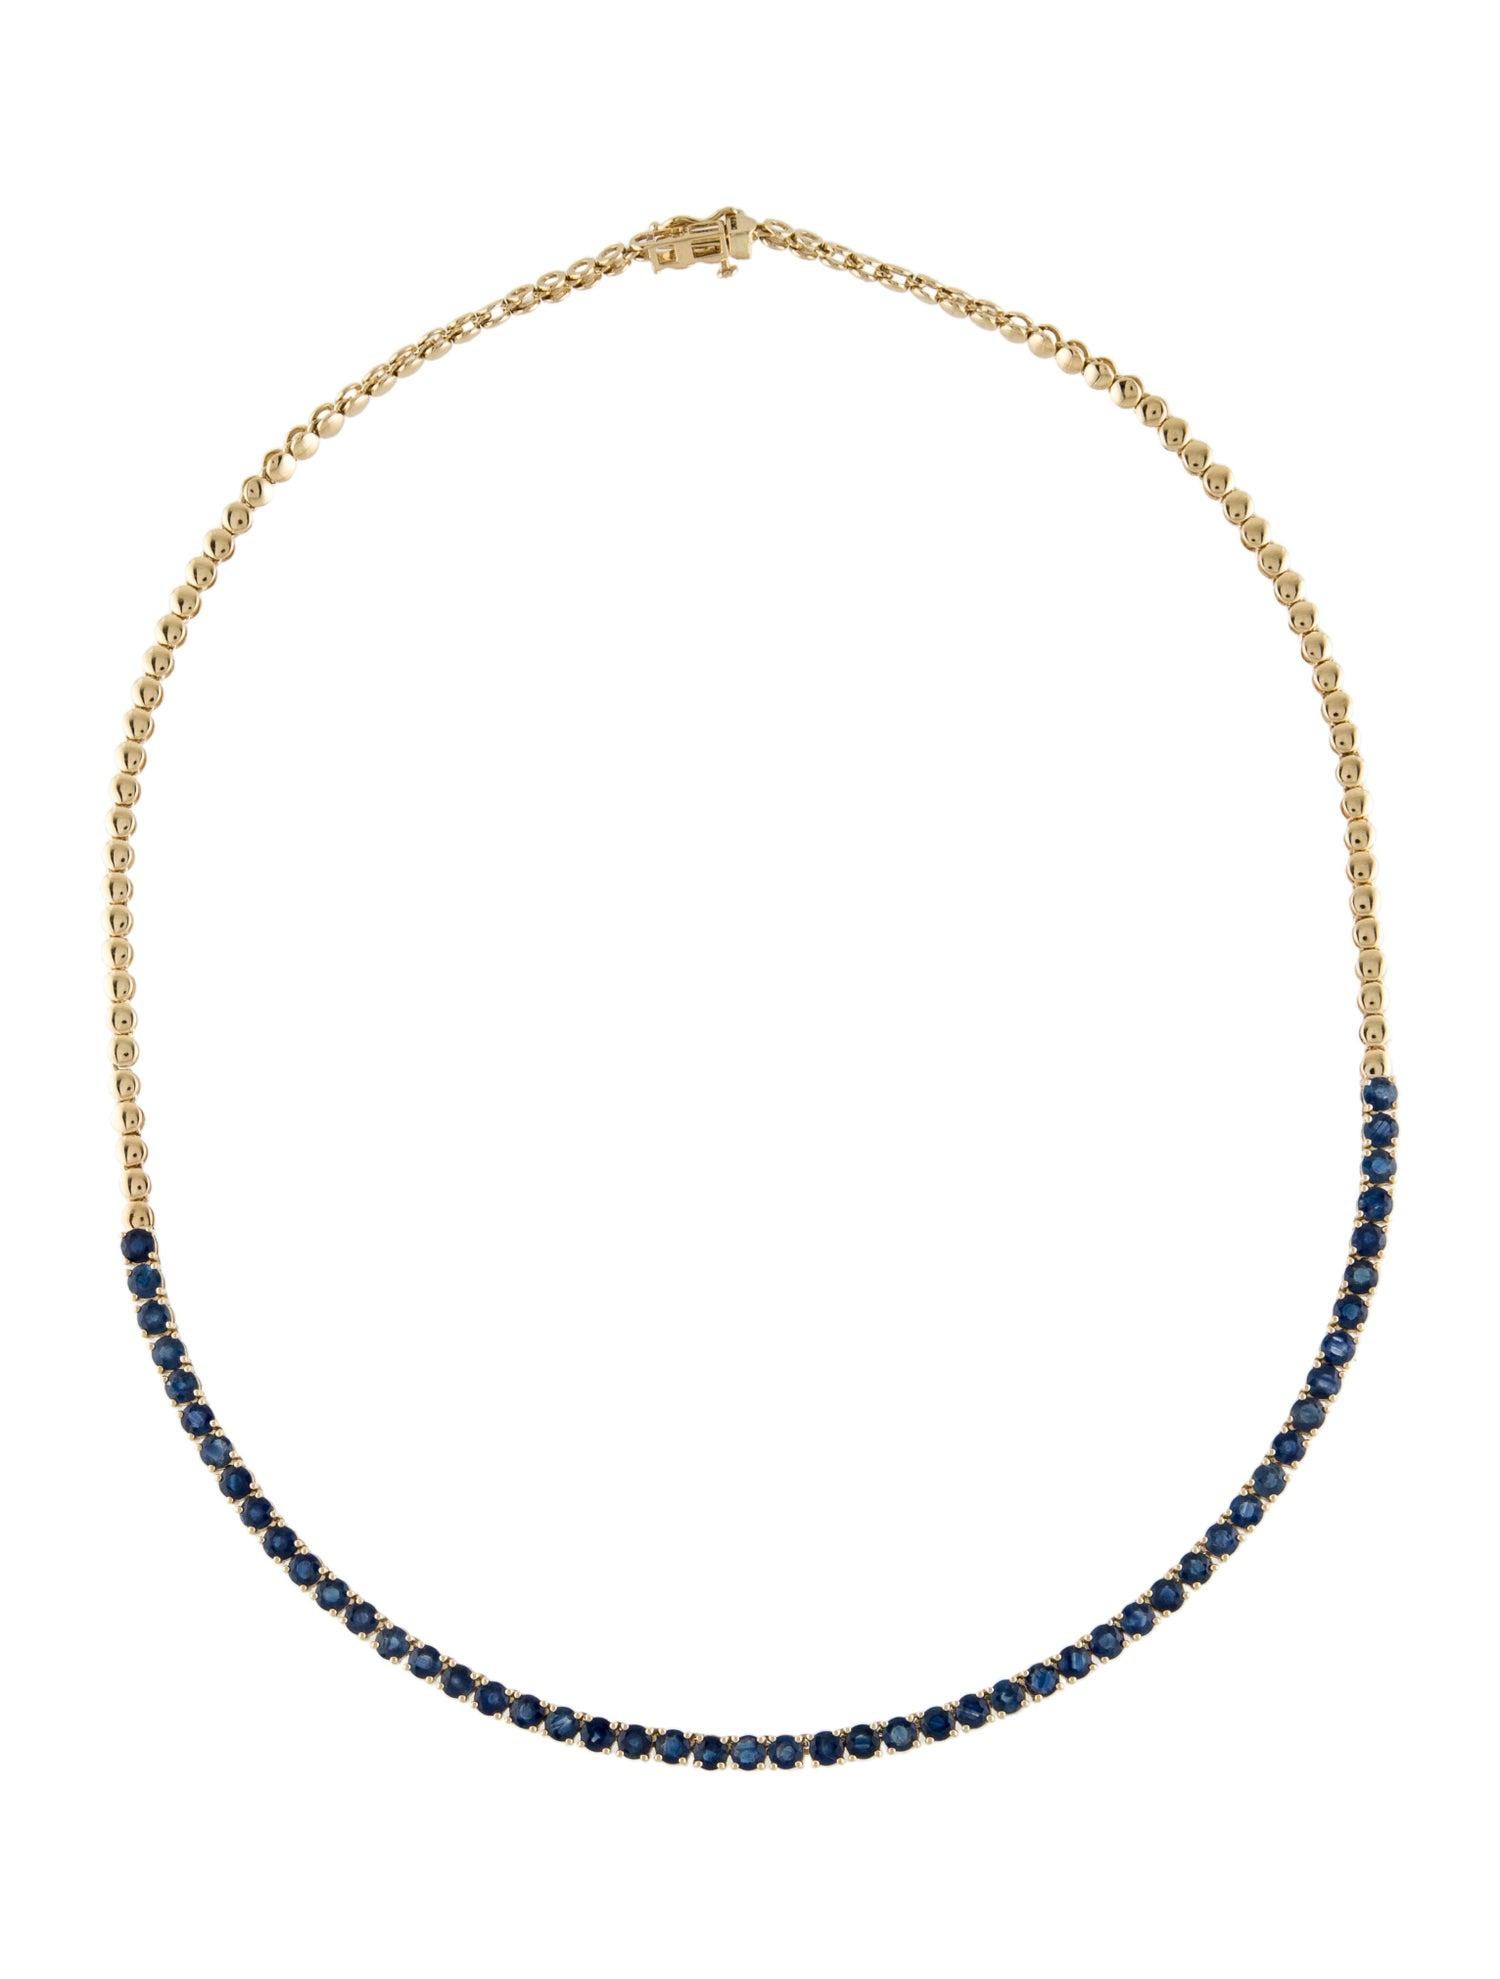 14K 10.20ctw Sapphire Station Necklace - Exquisite Gemstone Statement Piece In New Condition For Sale In Holtsville, NY